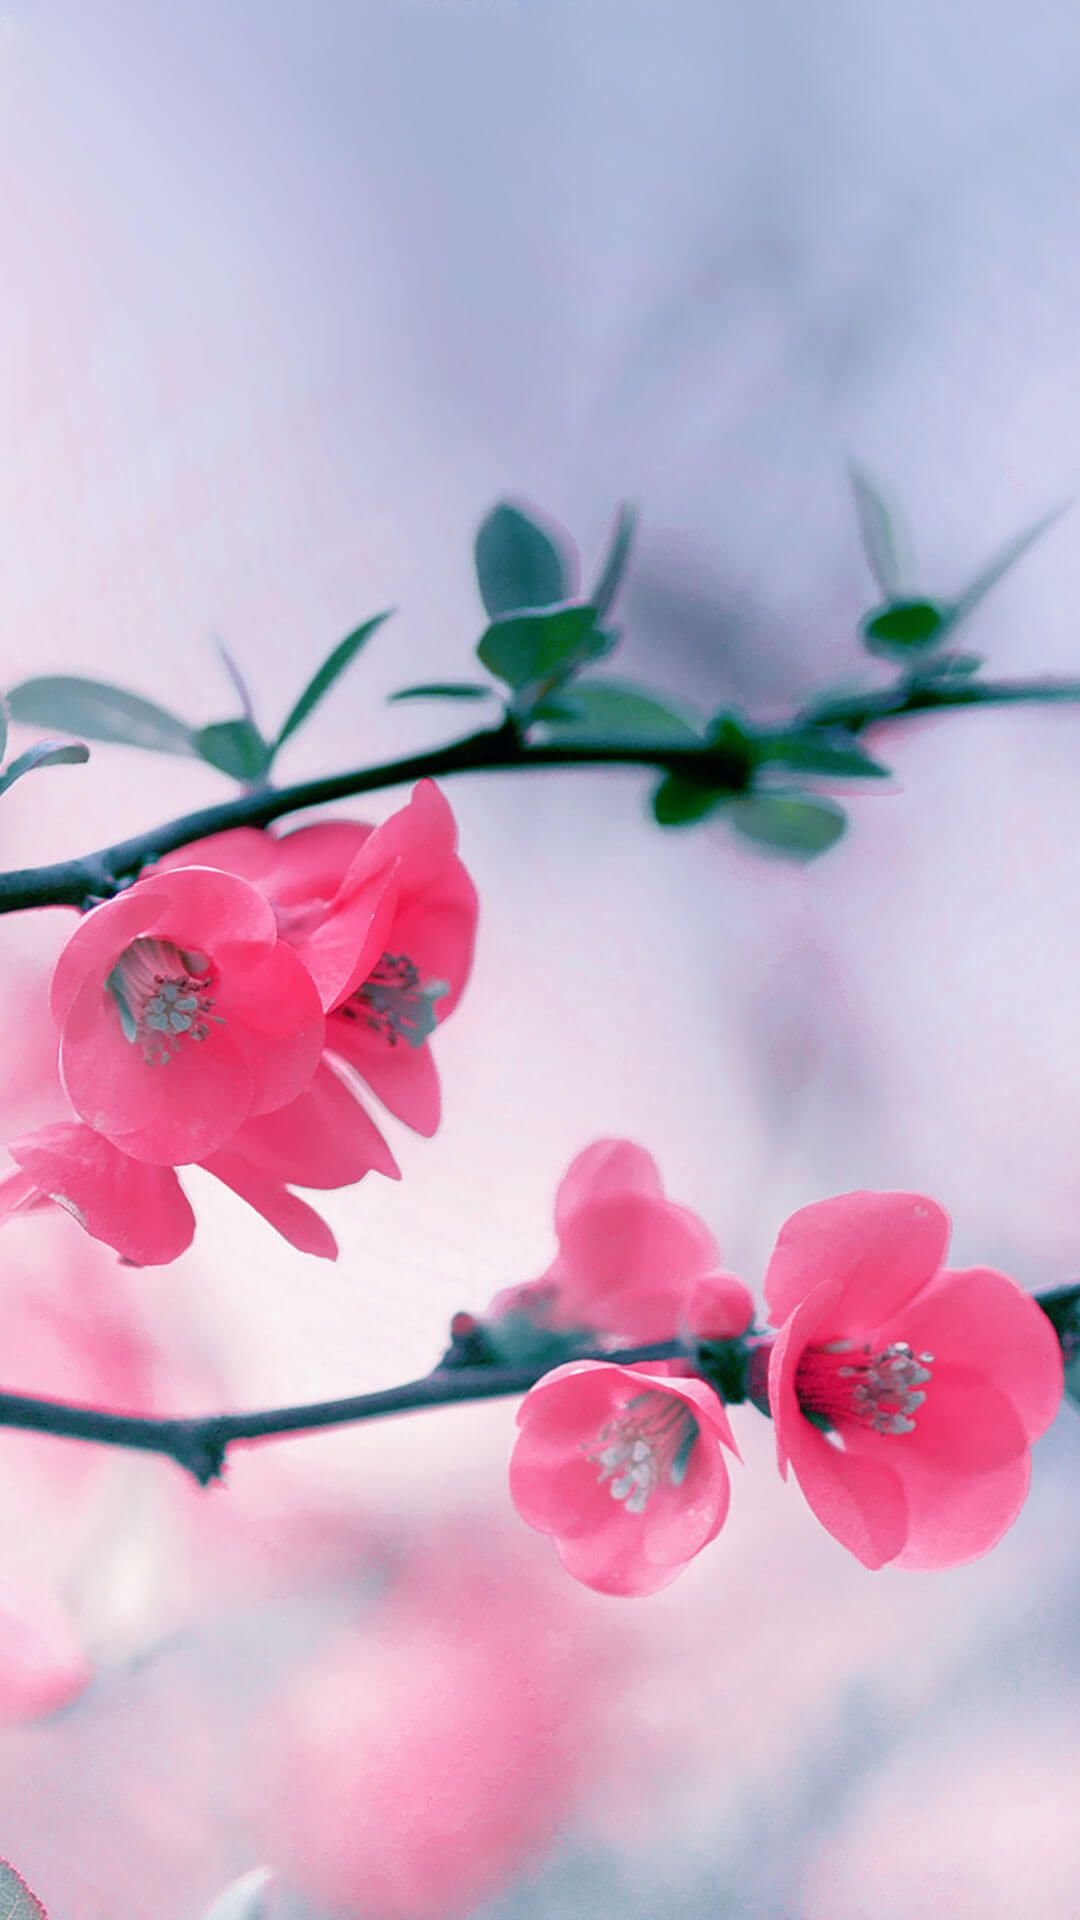 36 Aesthetic Spring Wallpaper for iPhone Free Download  May the Ray